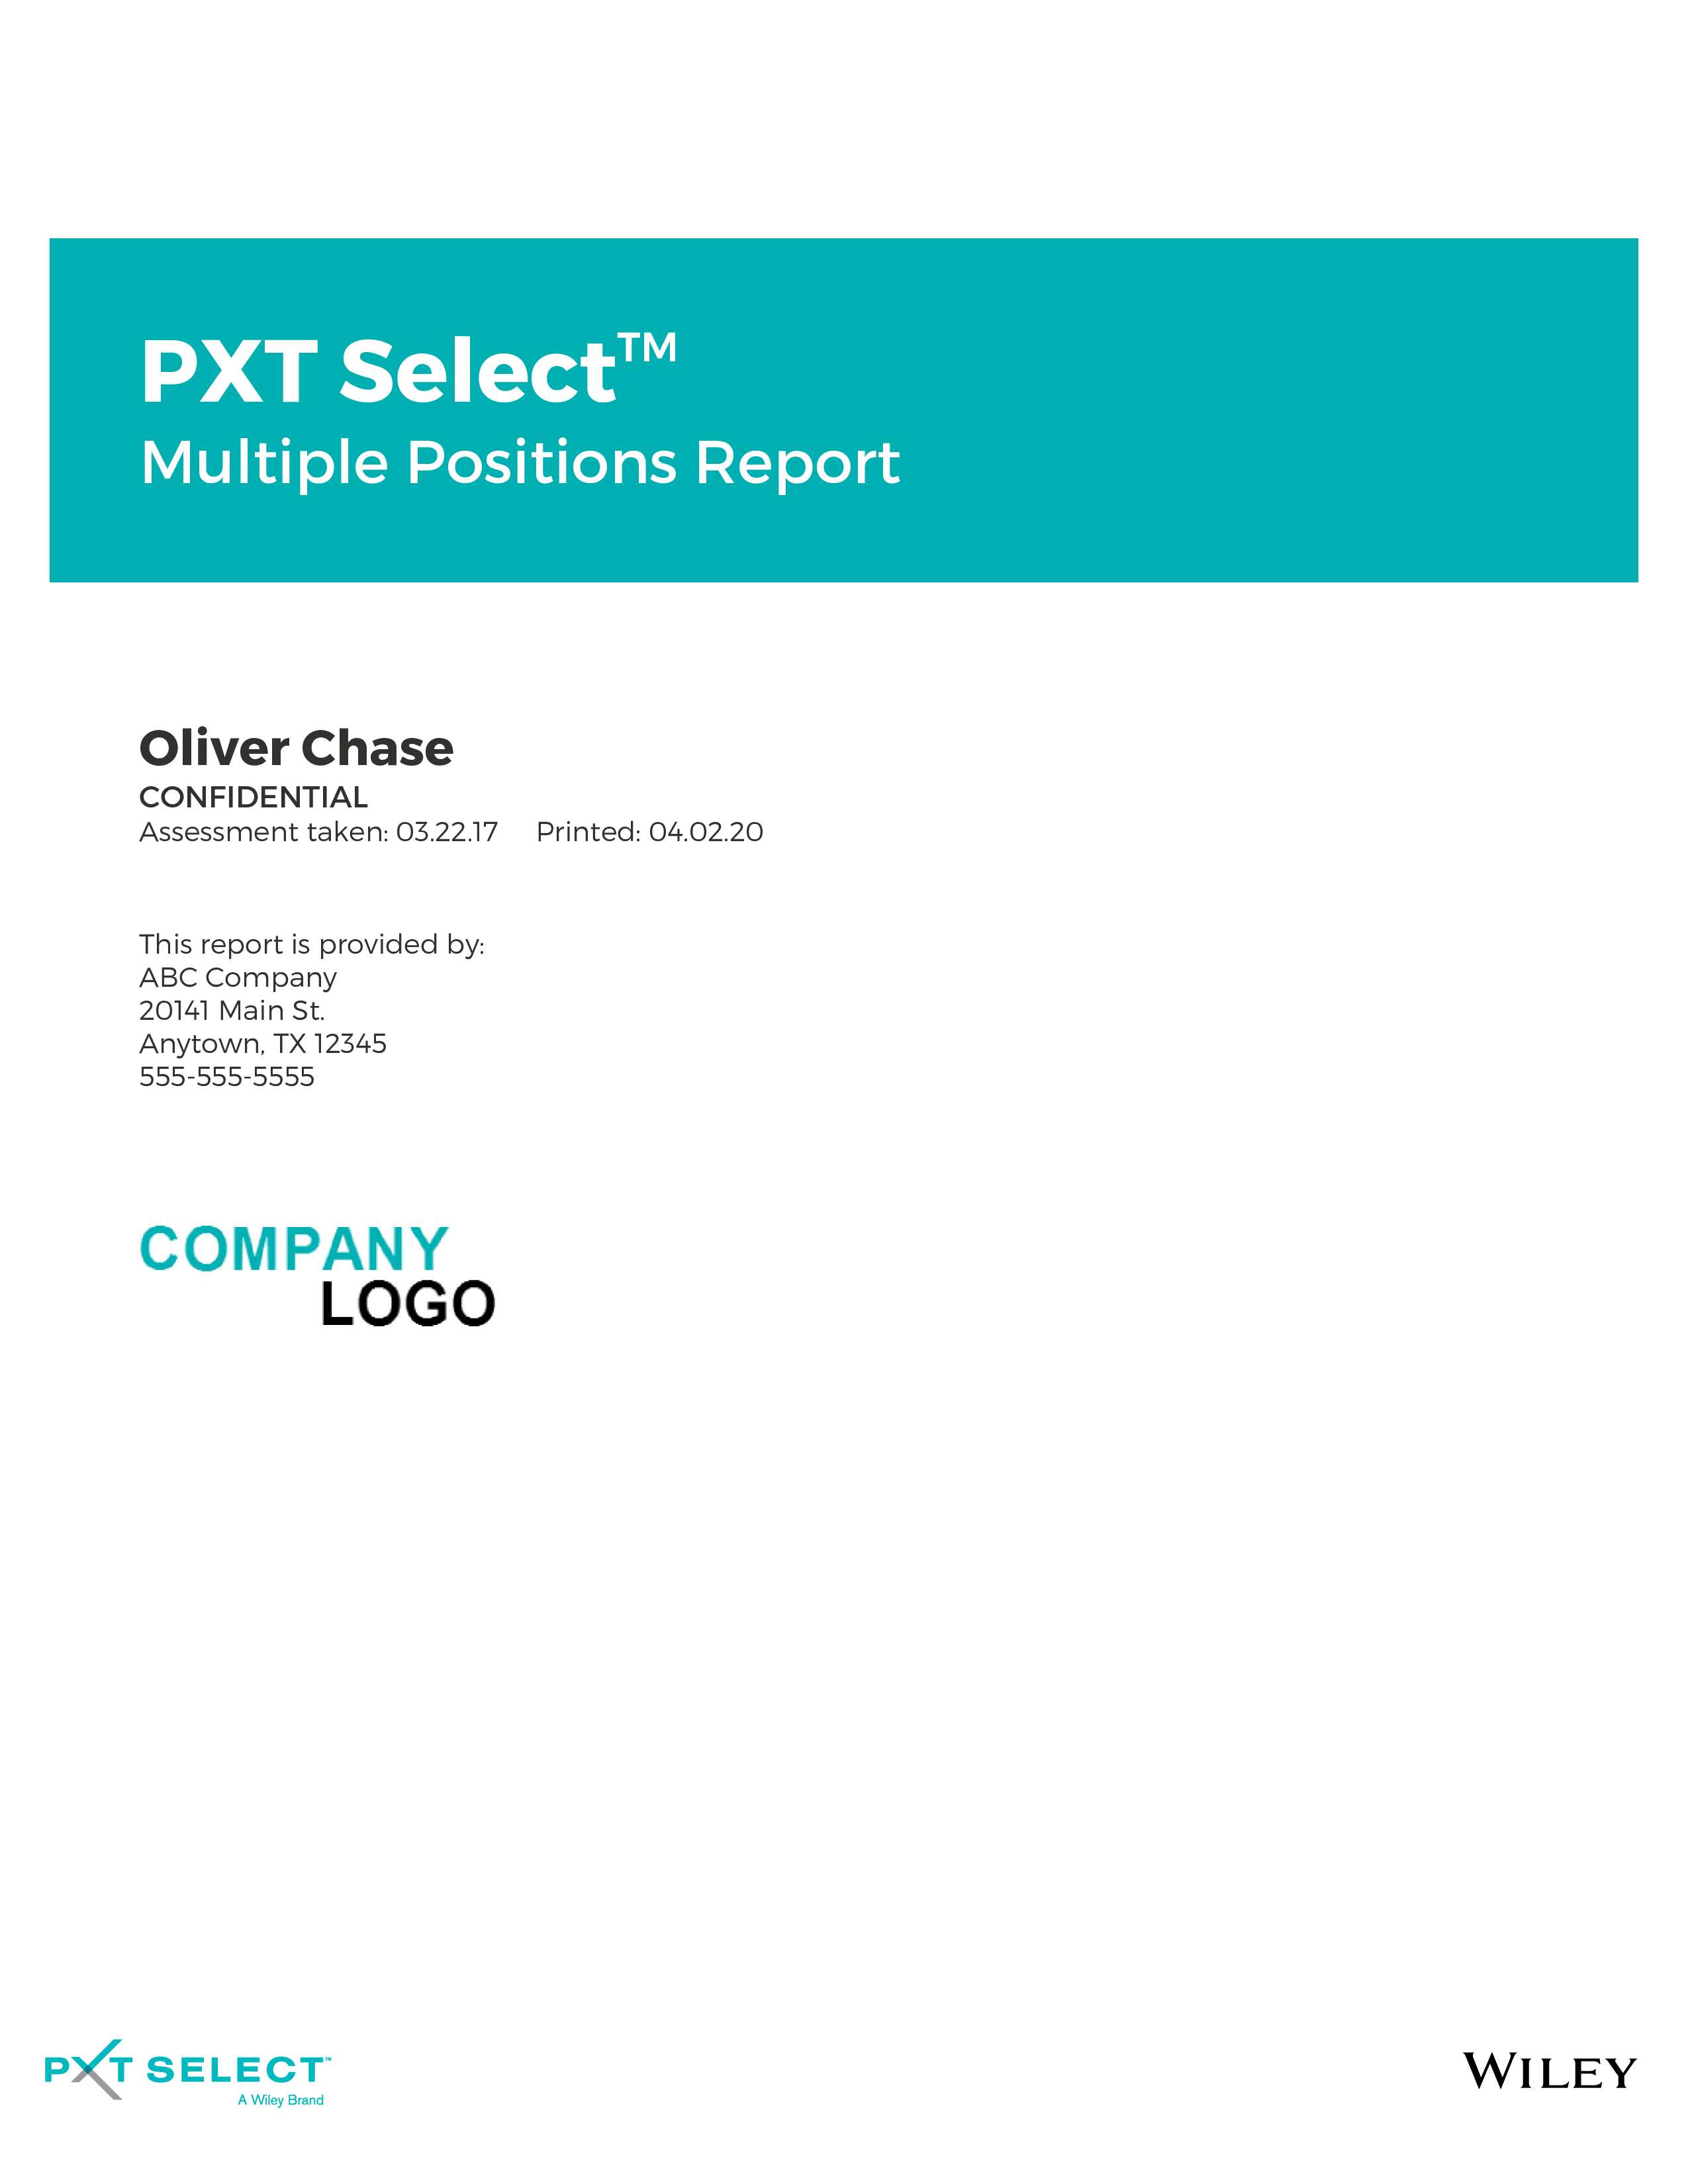 PXT Select Multiple Positions Report November 2021 Image